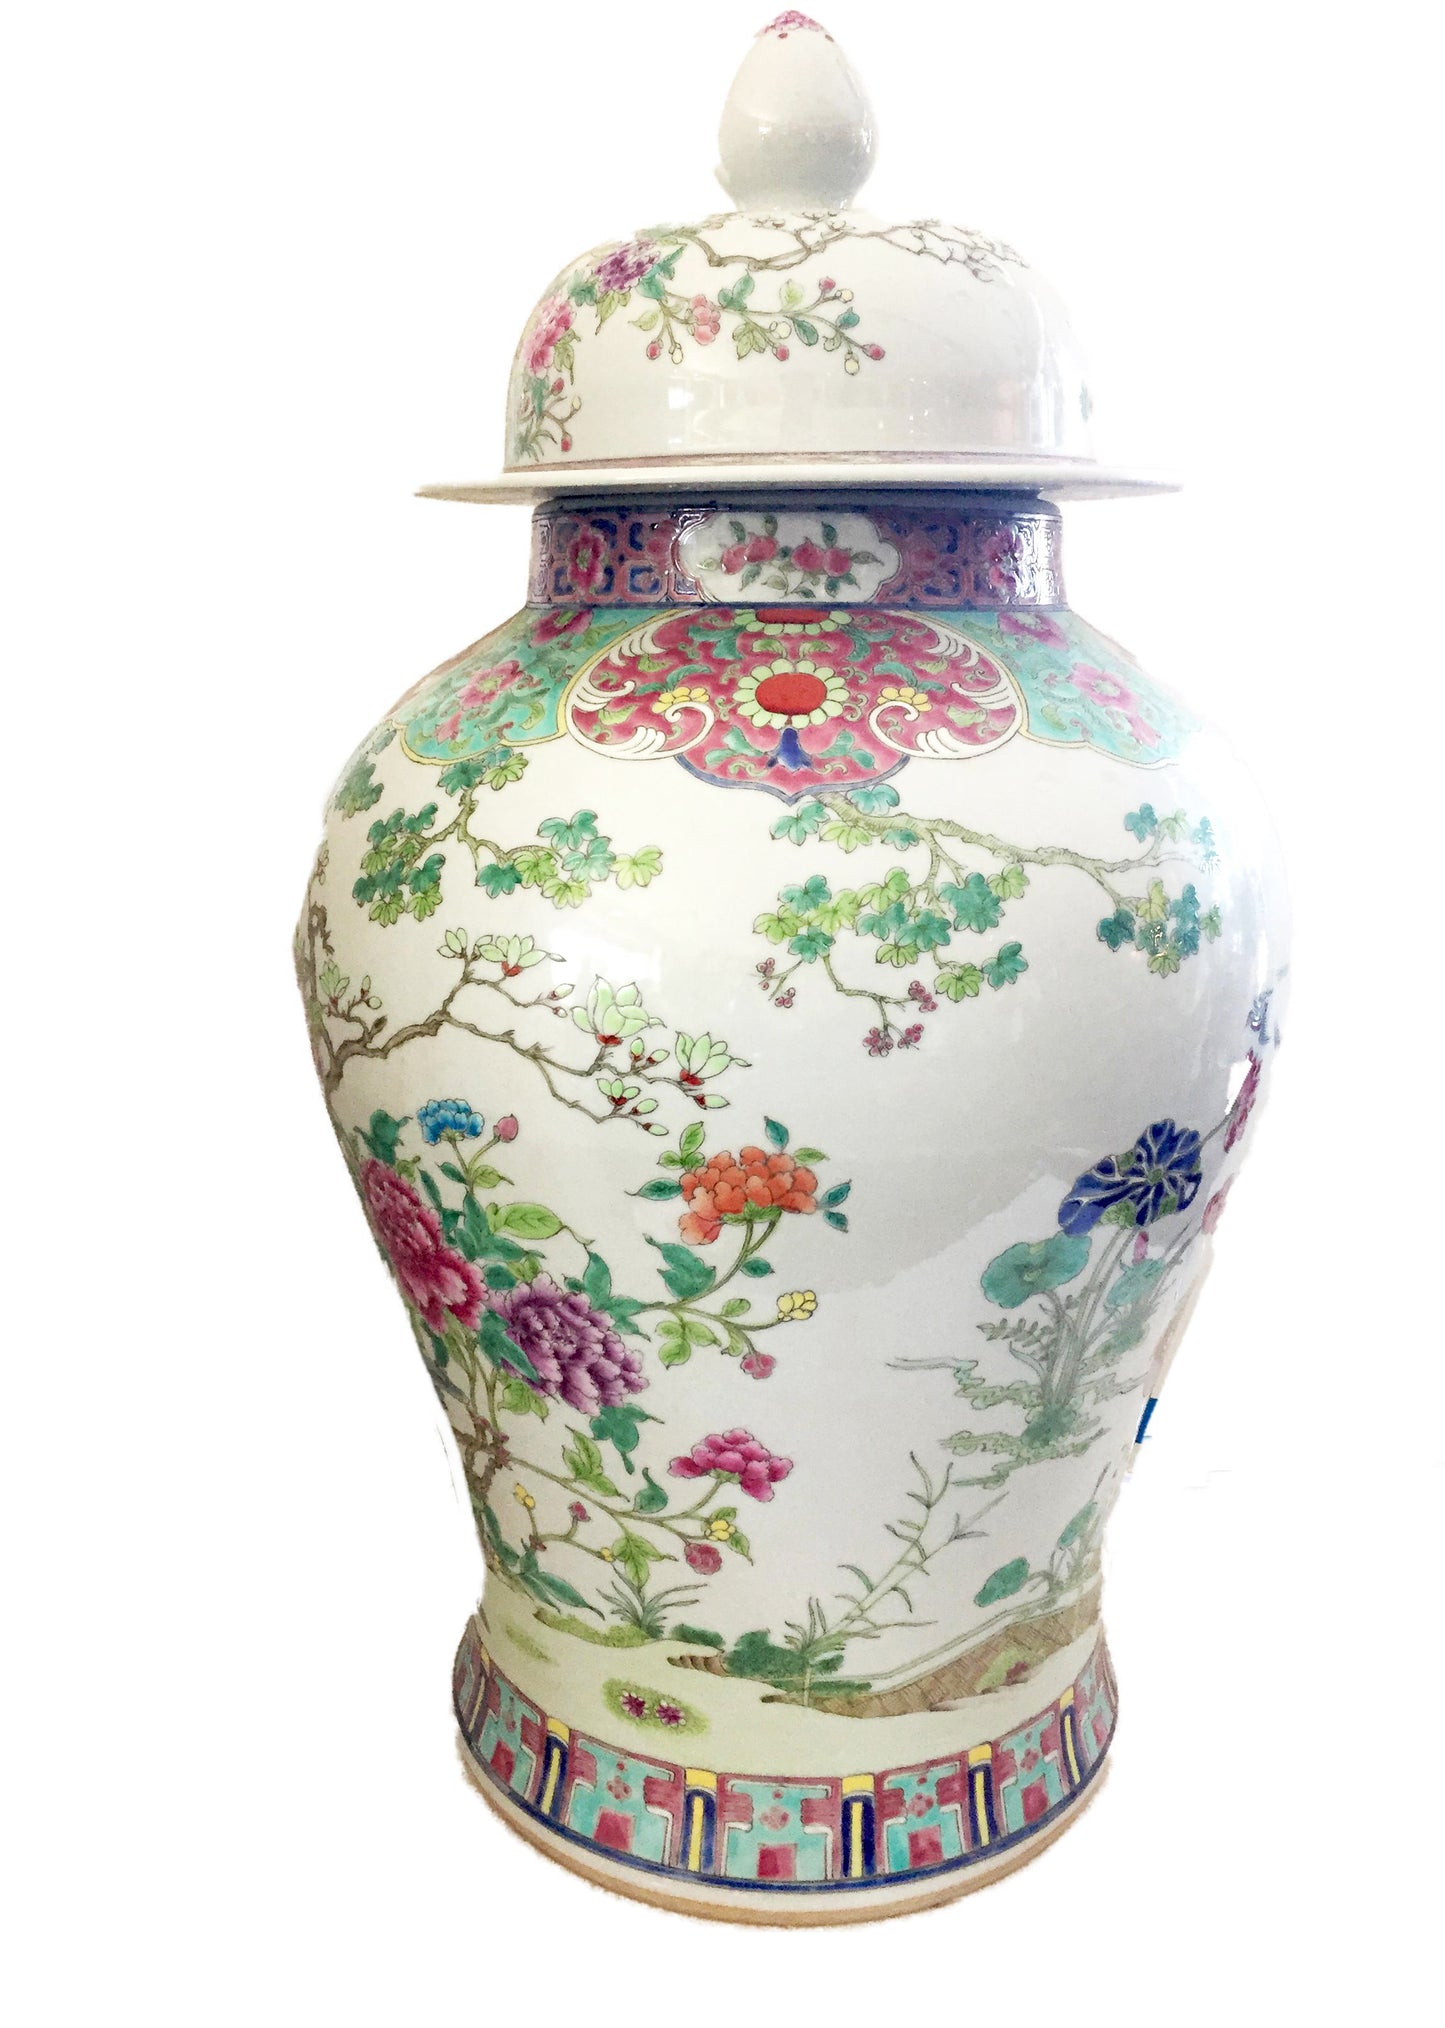 #1868 LG Chinese H Painted Porcelain  Famille Rose Ginger Jar w/ Phoenix  25.5" H